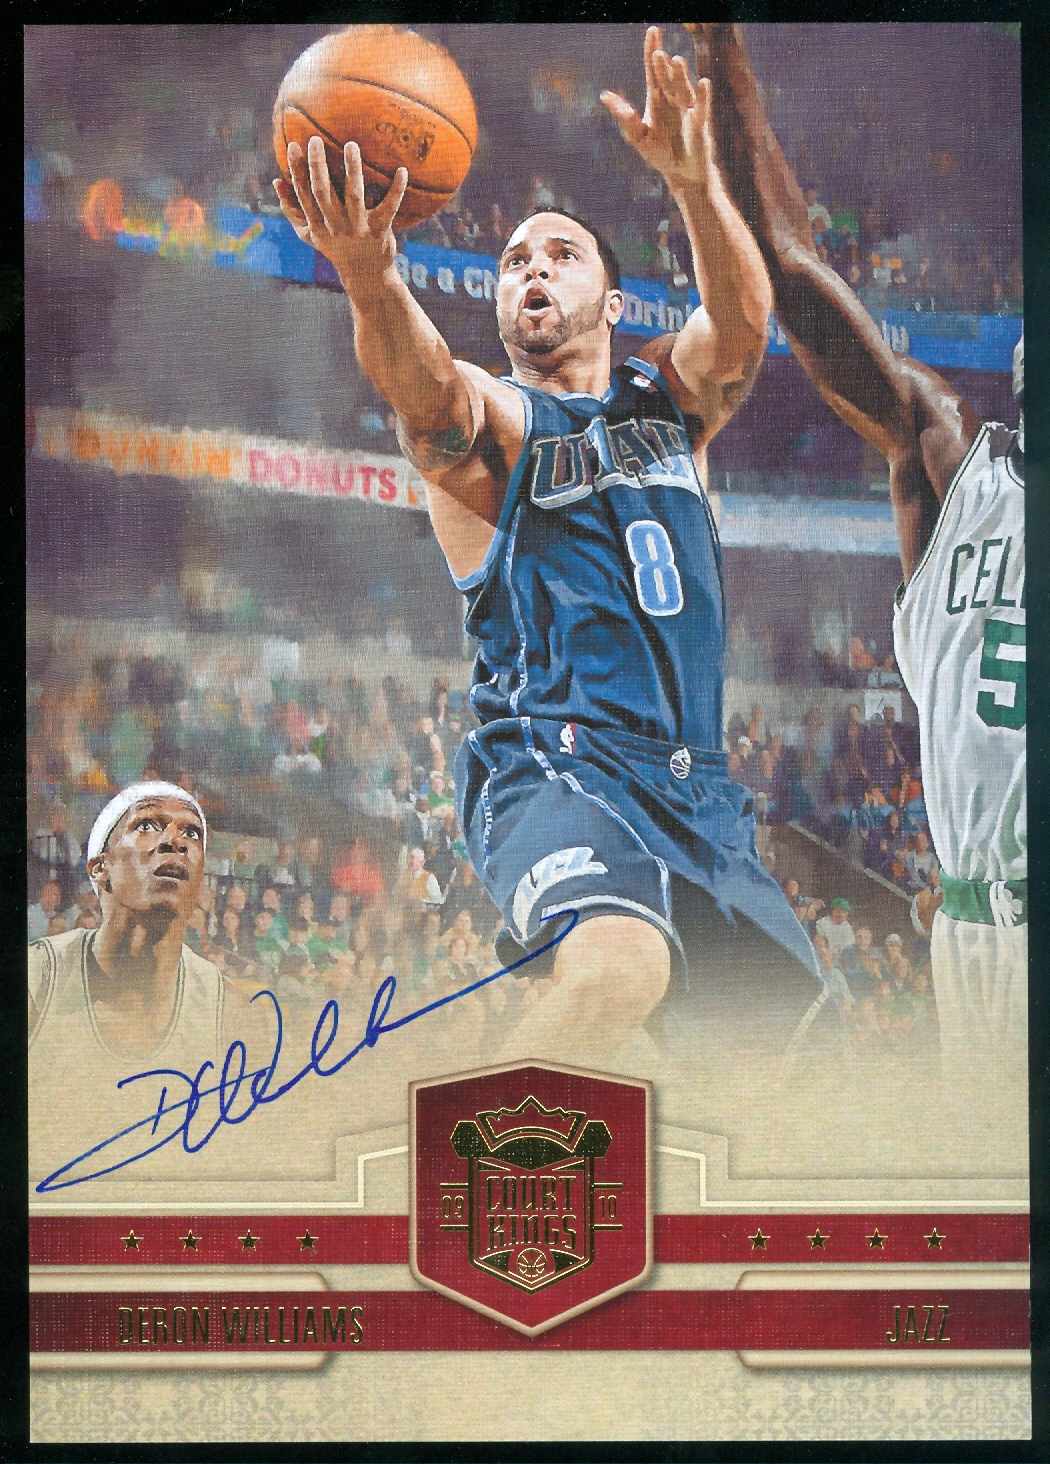 2009-10 Court Kings Jumbo Boxtoppers Autographs #35 Deron Williams/49